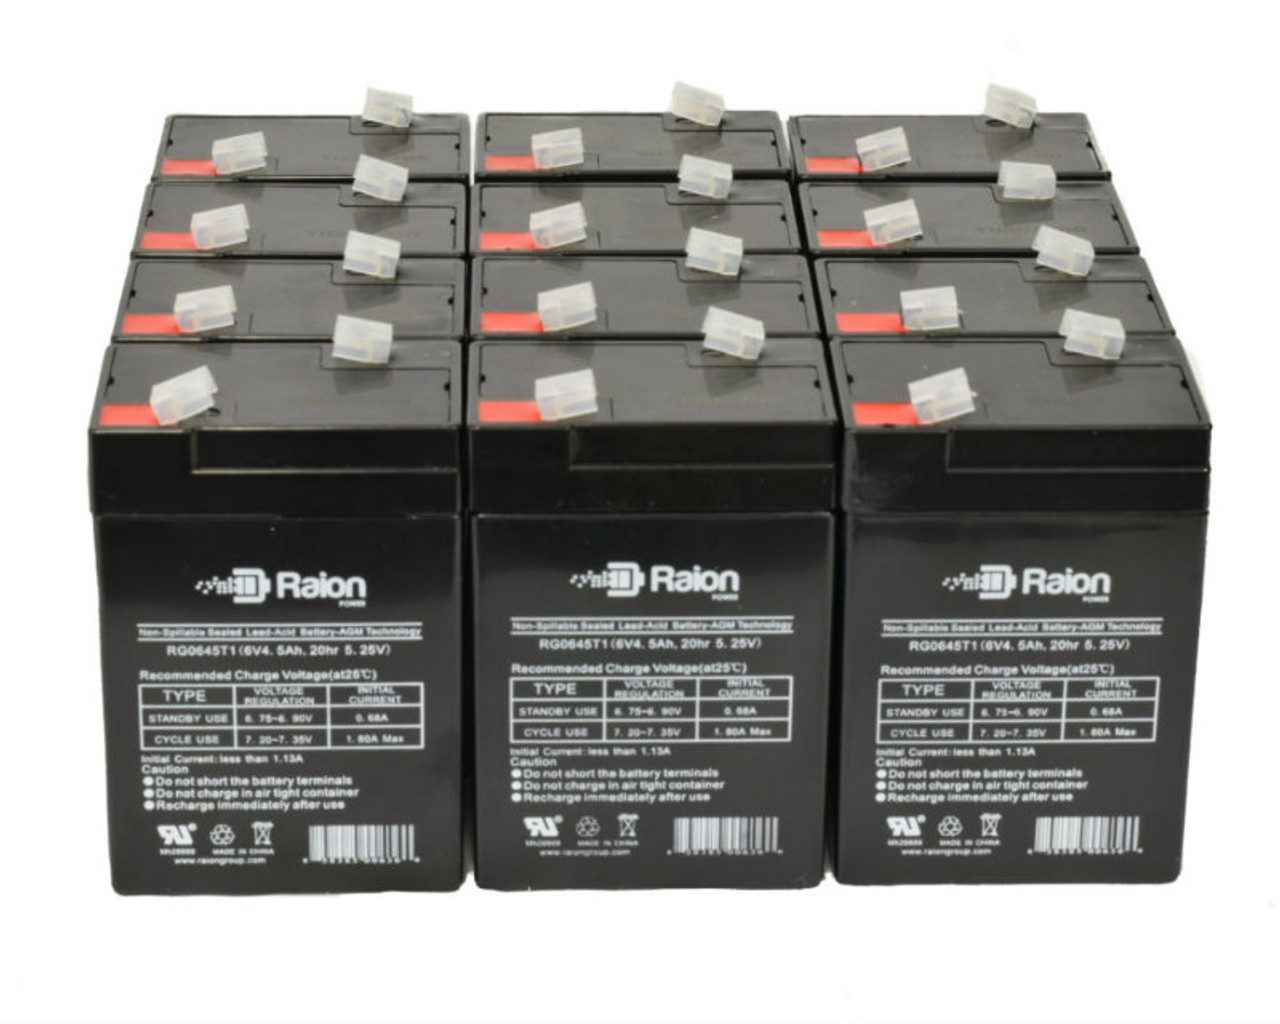 Raion Power 6 Volt 4.5Ah RG0645T1 Replacement Battery for Narada 3-FM-4.2 - 12 Pack